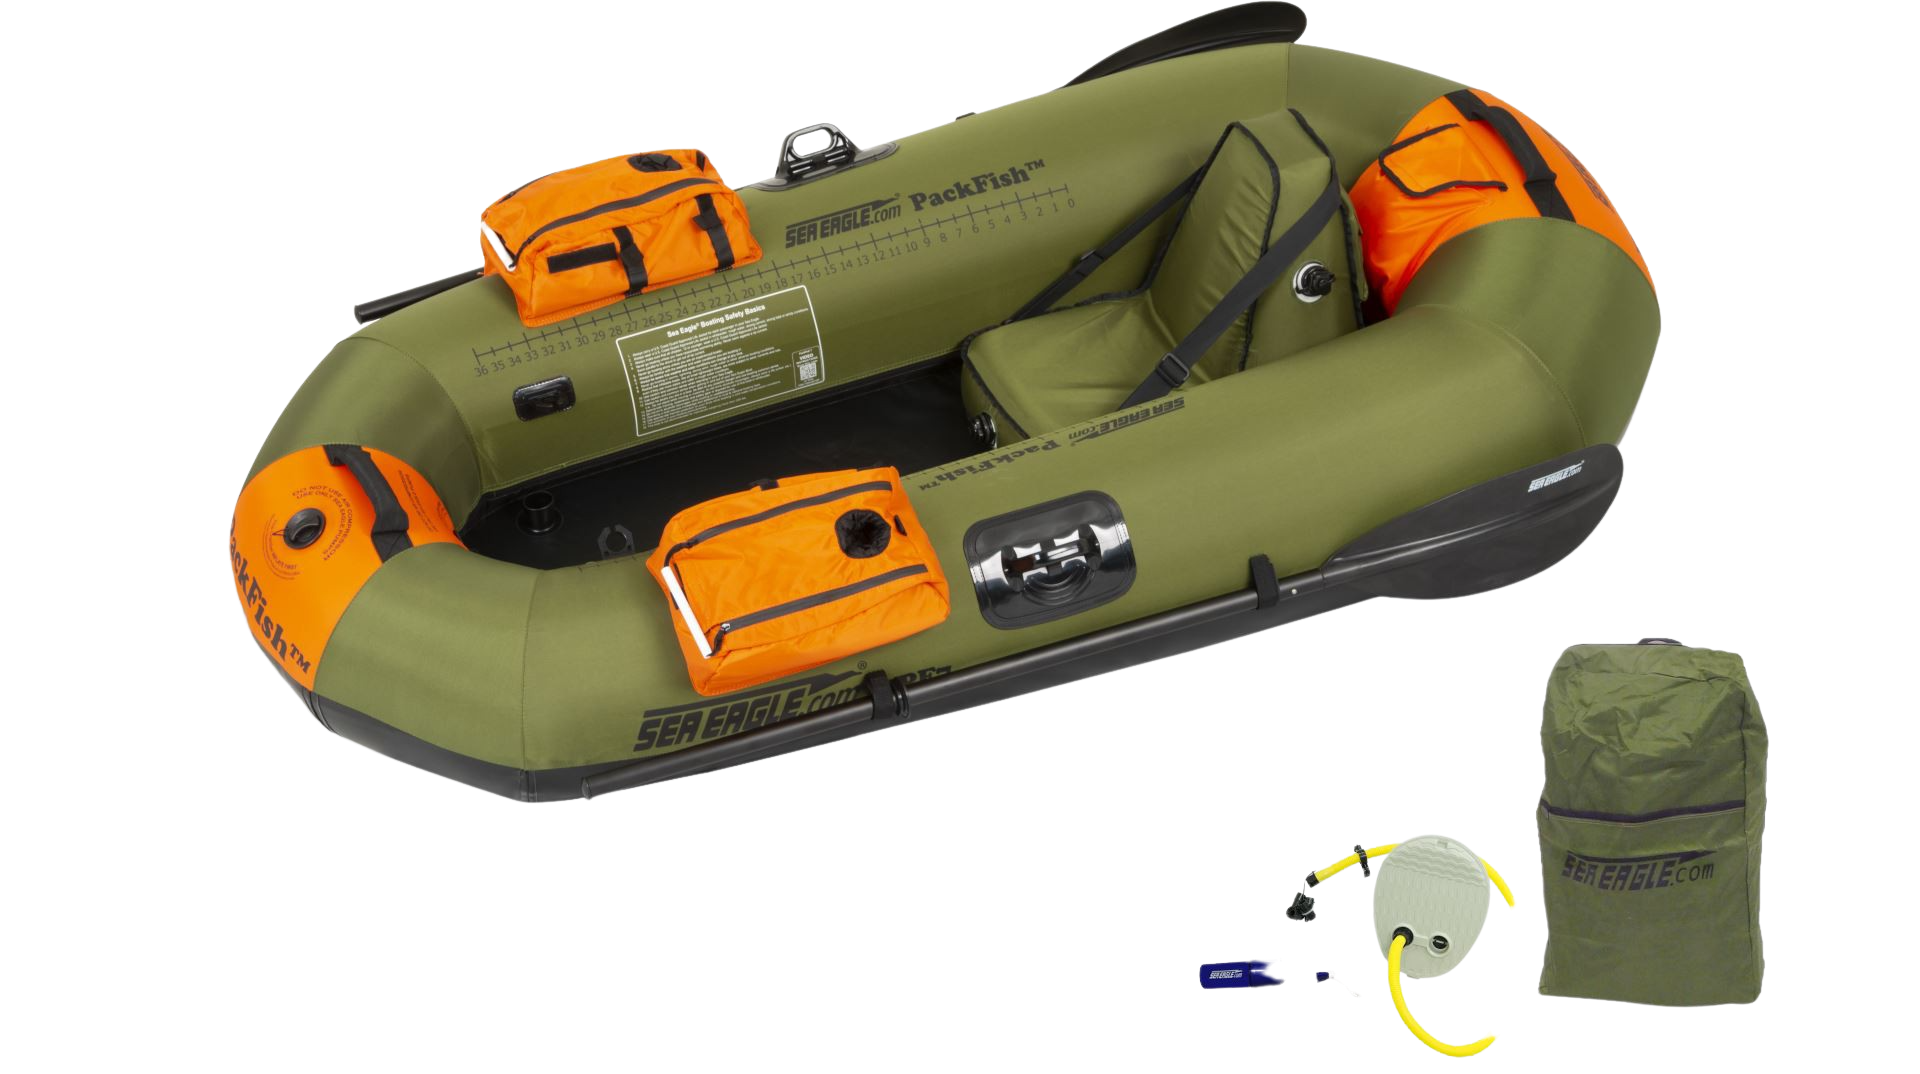 Sea Eagle PackFish 7 Inflatable Boat Deluxe Fishing Package Green Orange New